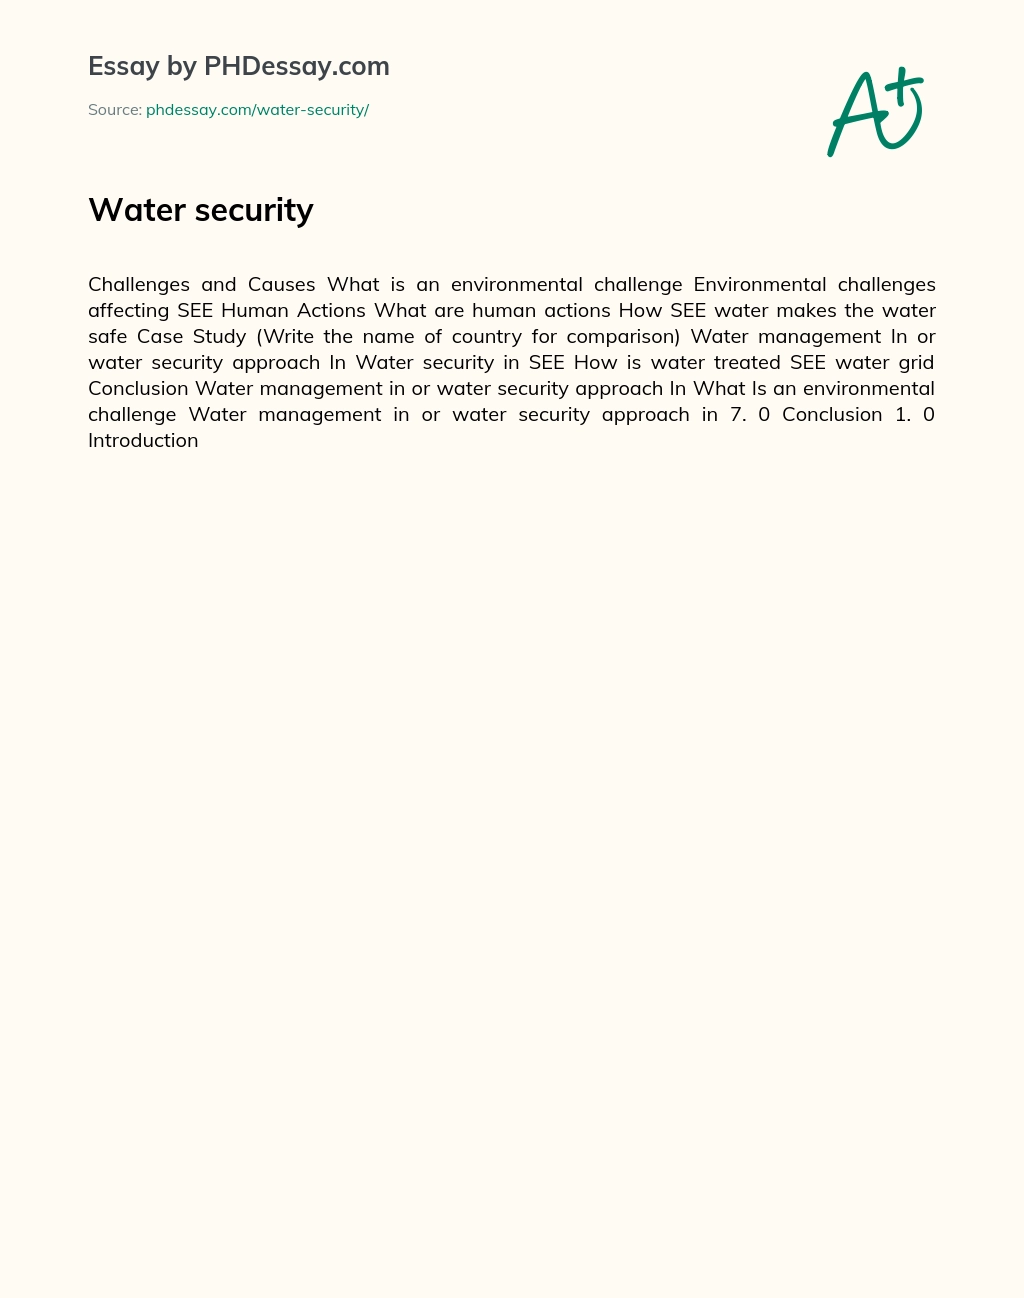 Environmental Challenges and Human Actions in SEE: Water Management and Security Approach essay